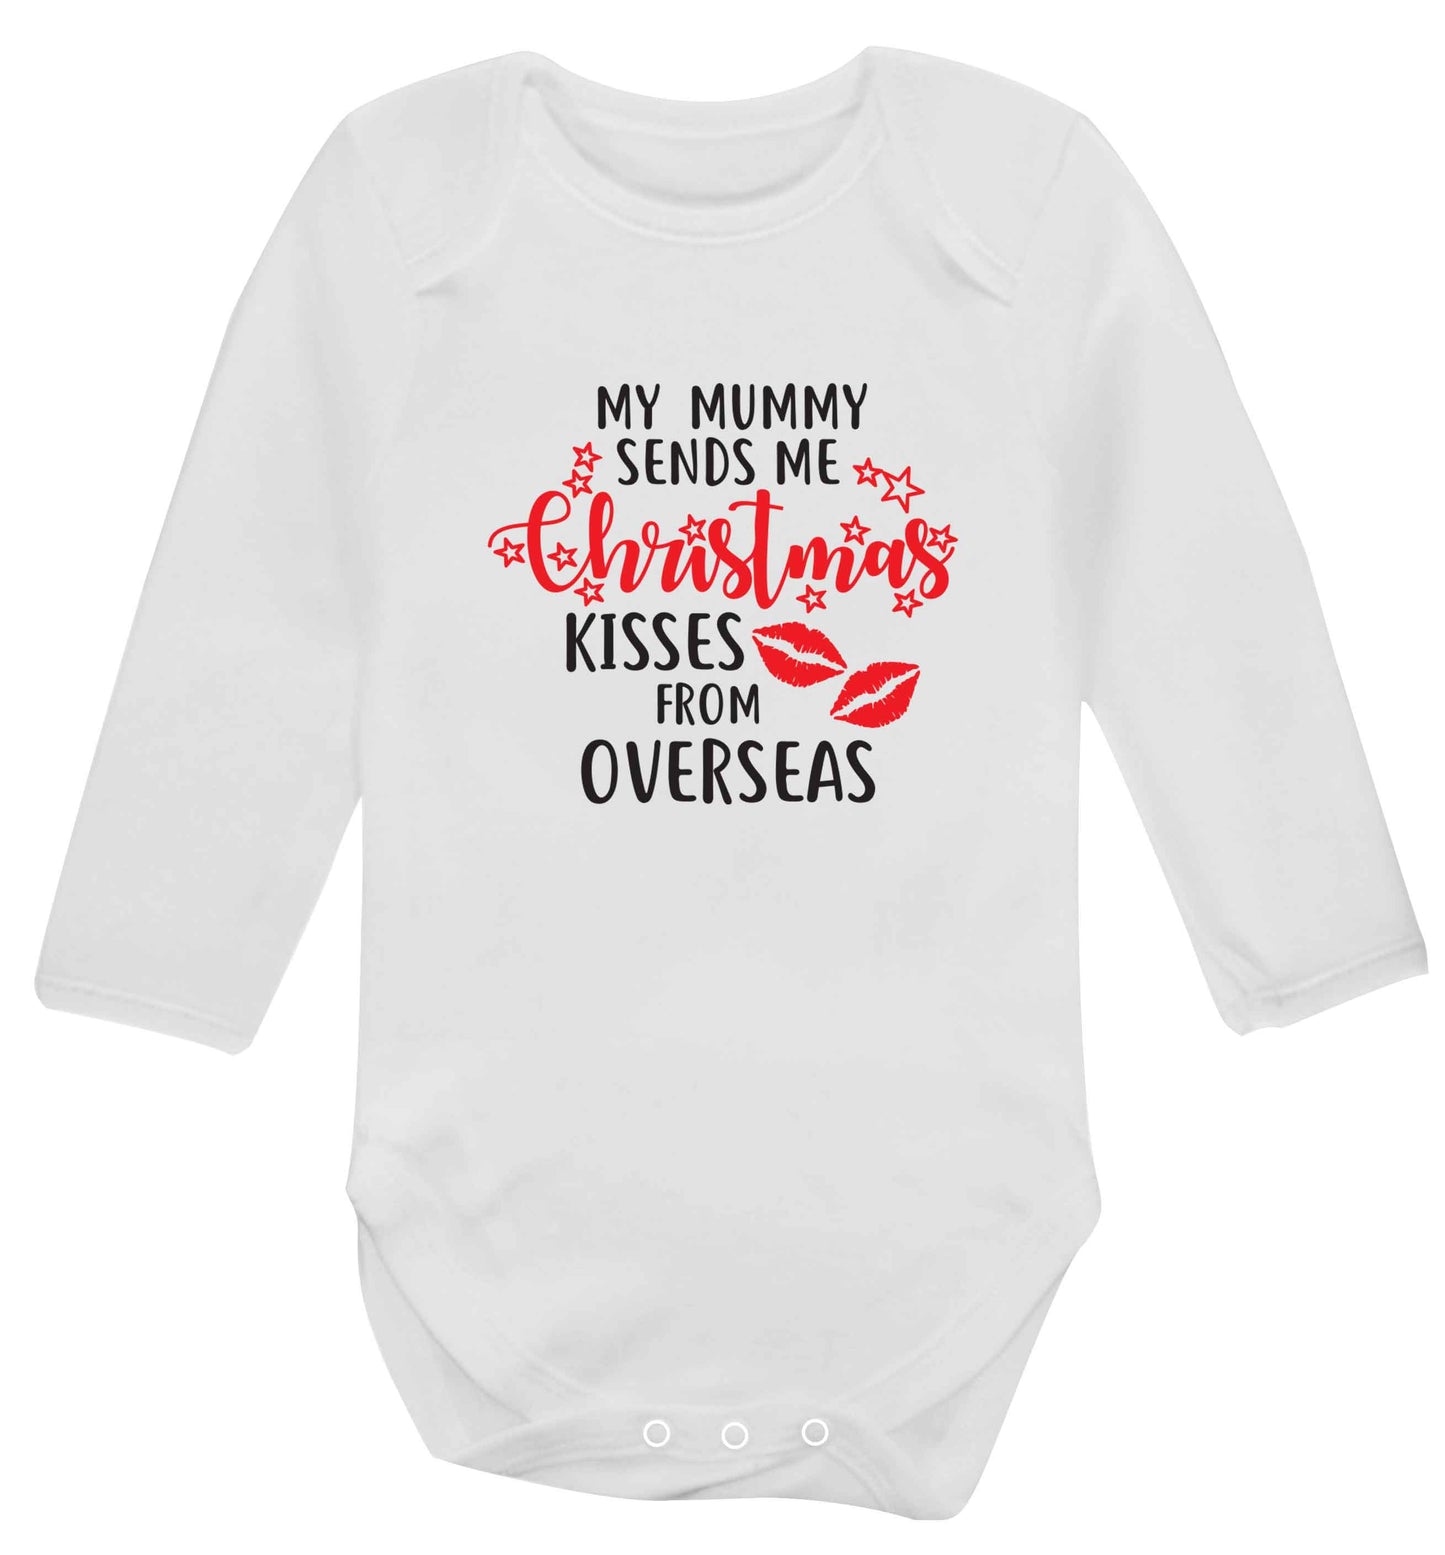 Mummy Christmas Kisses Overseas baby vest long sleeved white 6-12 months